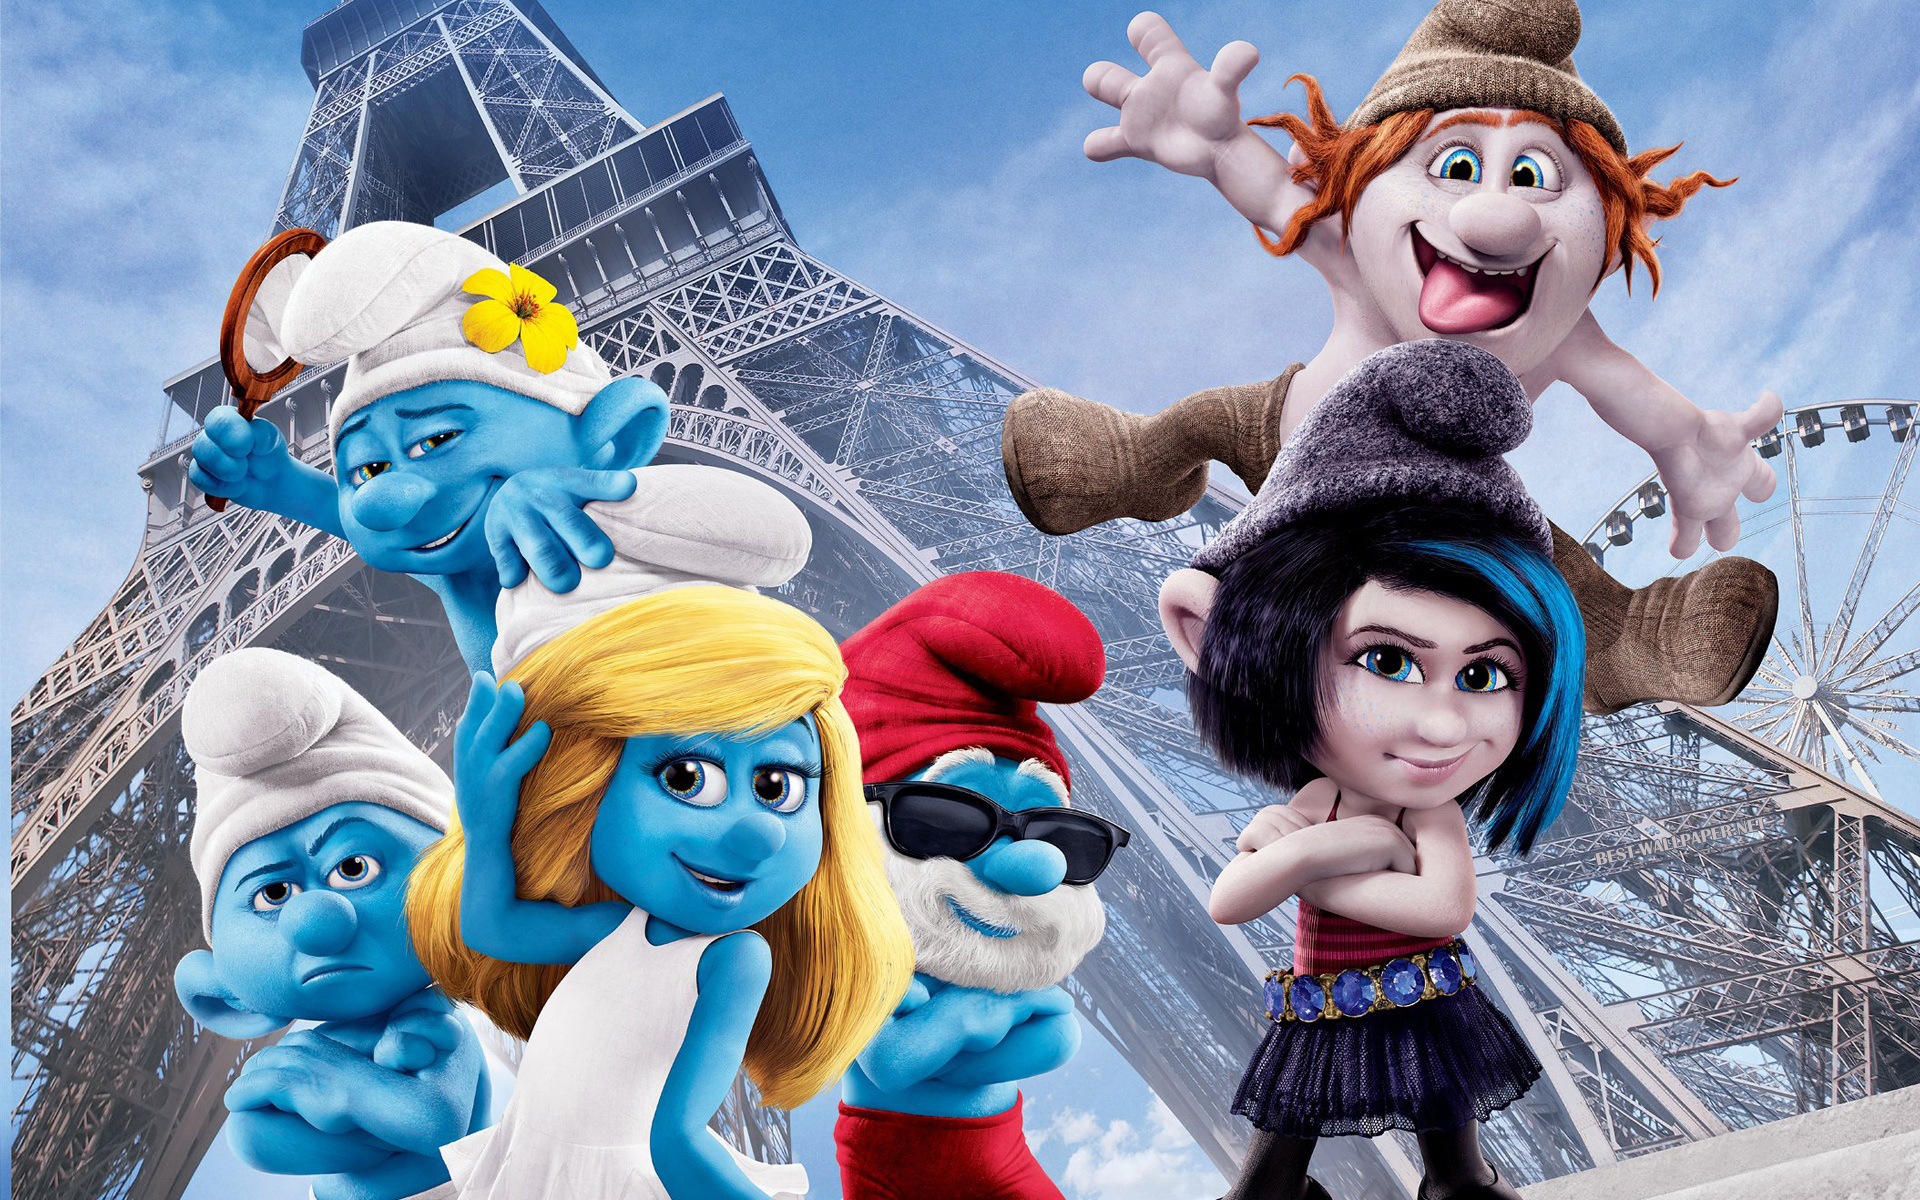 The Smurfs 2 HD movie wallpapers #1 - 1920x1200